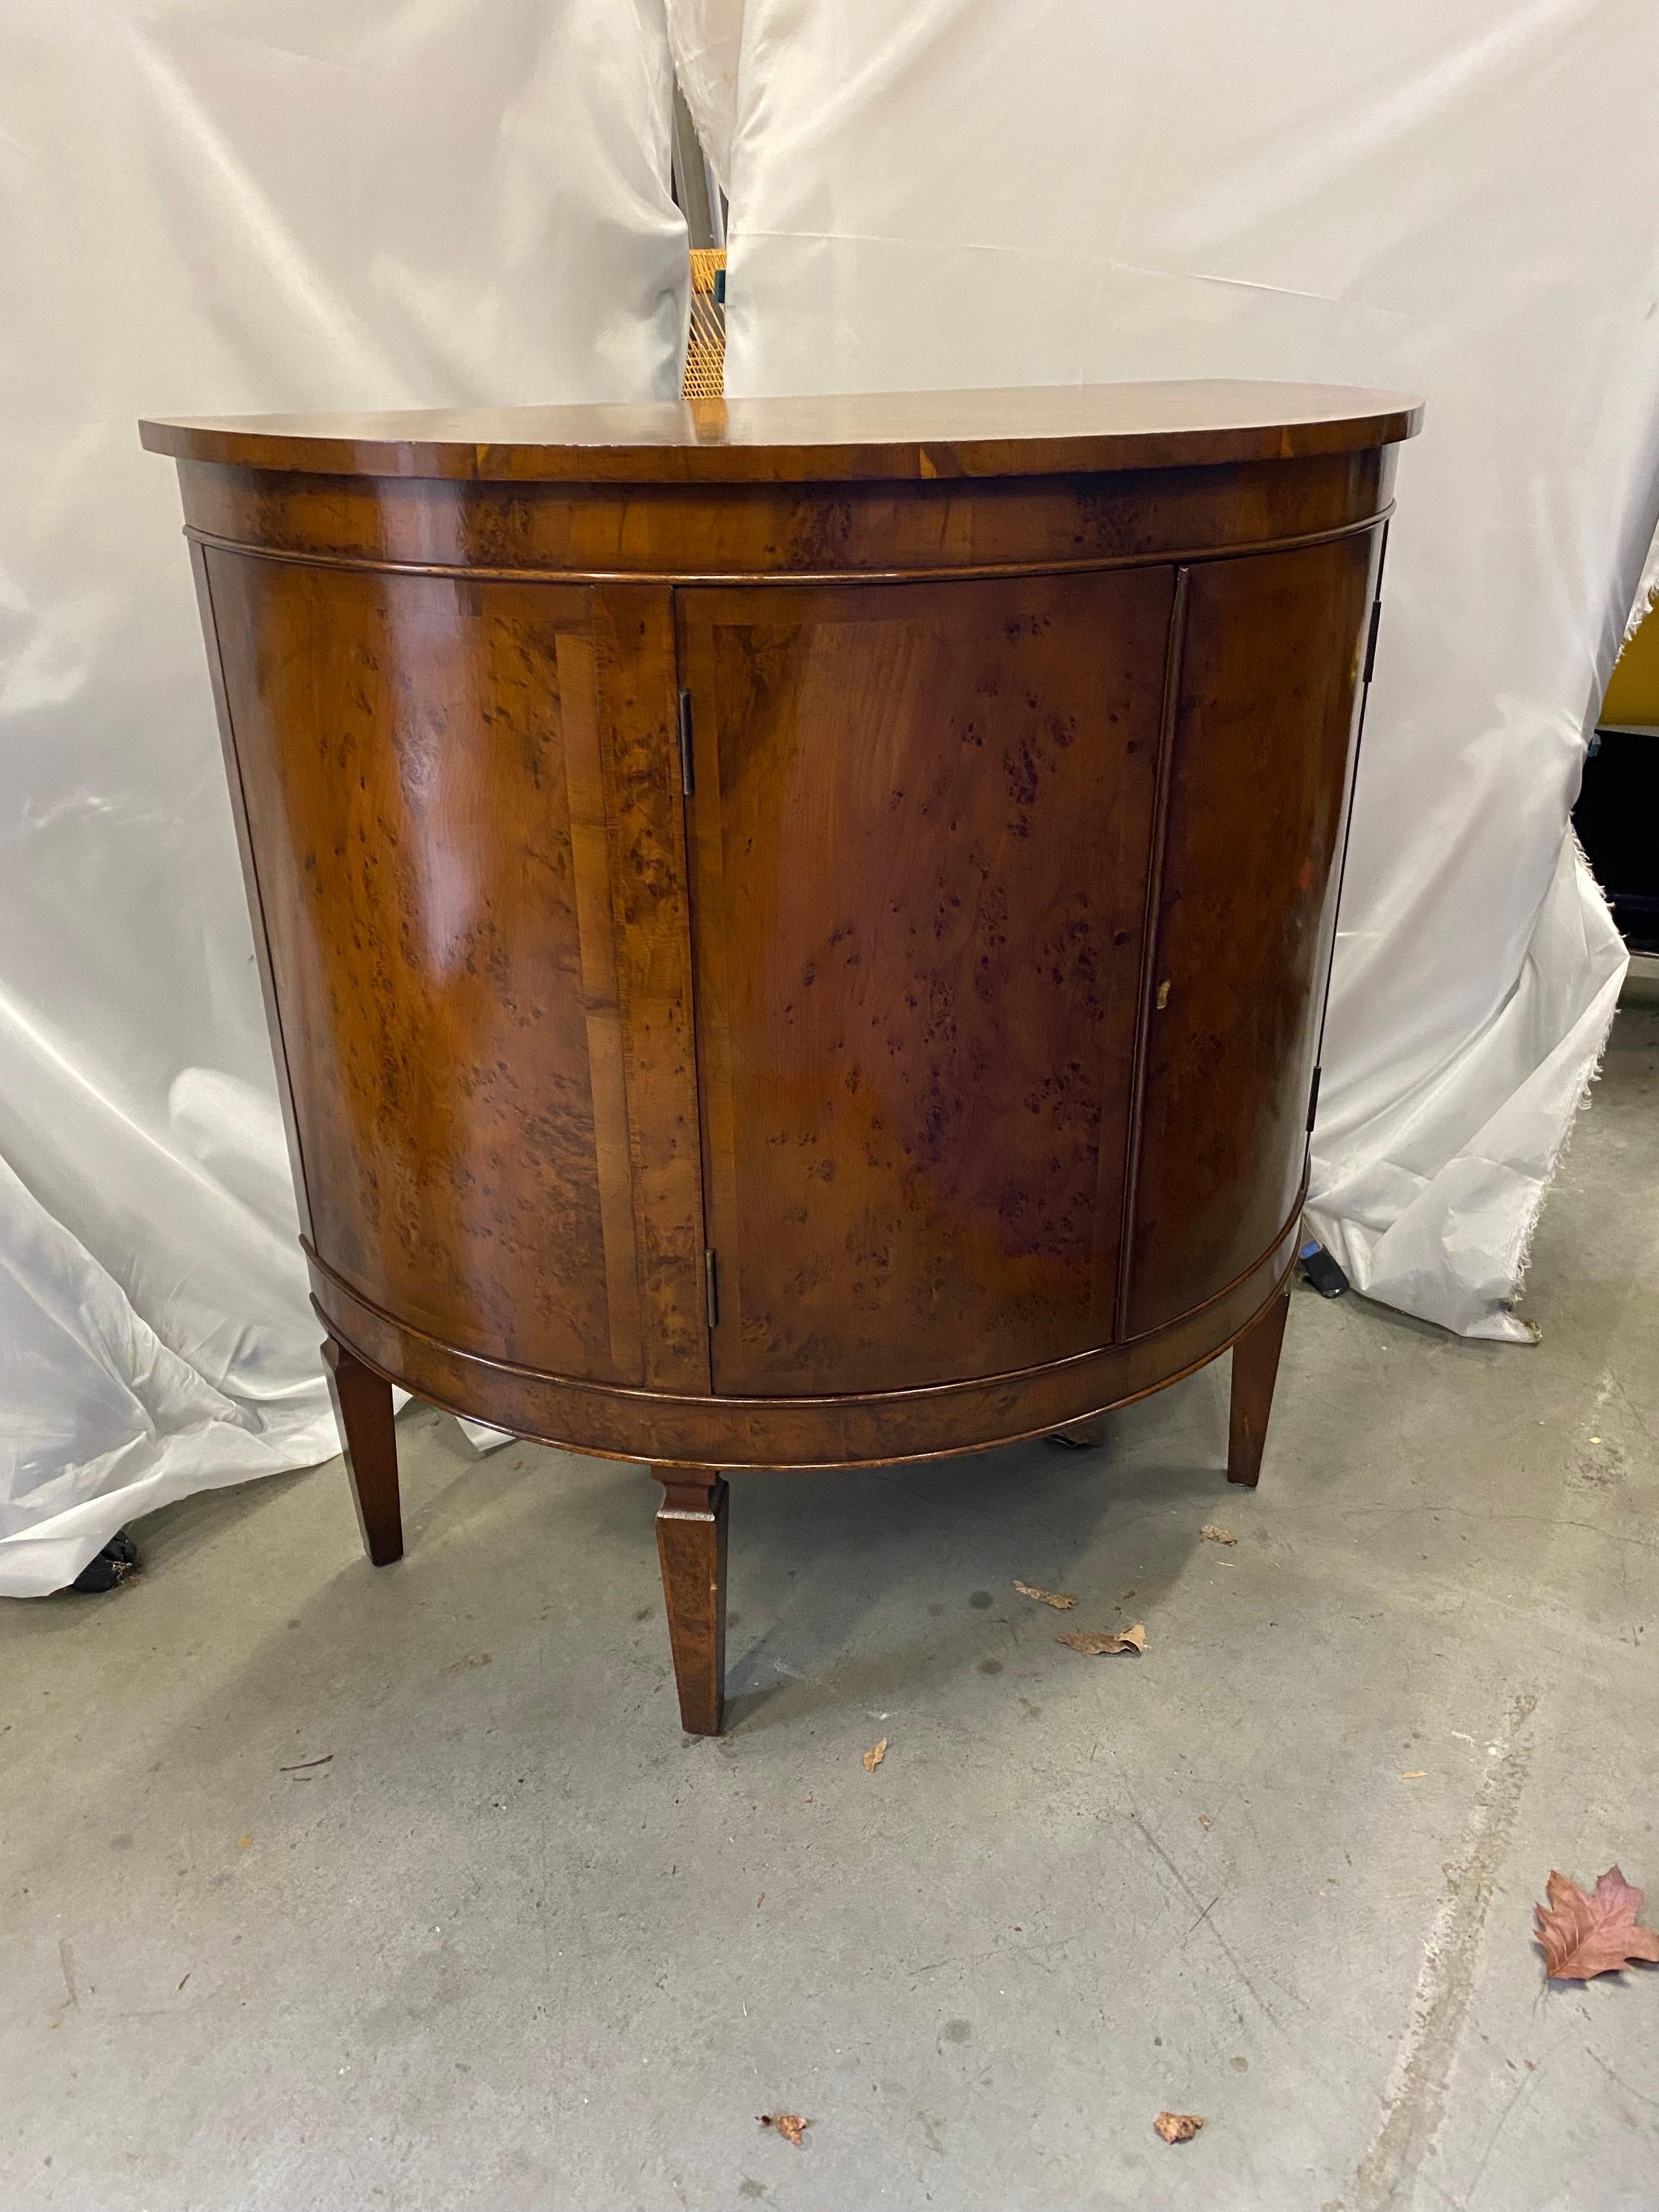 A handsome demilune commode with two doors and storage in a rich burl walnut.  The early 20th Century cabinet in a smaller size measuring 33 inches wide.  The highly figurative burl wood with cross banding inlay on the half circle top, with 2 doors